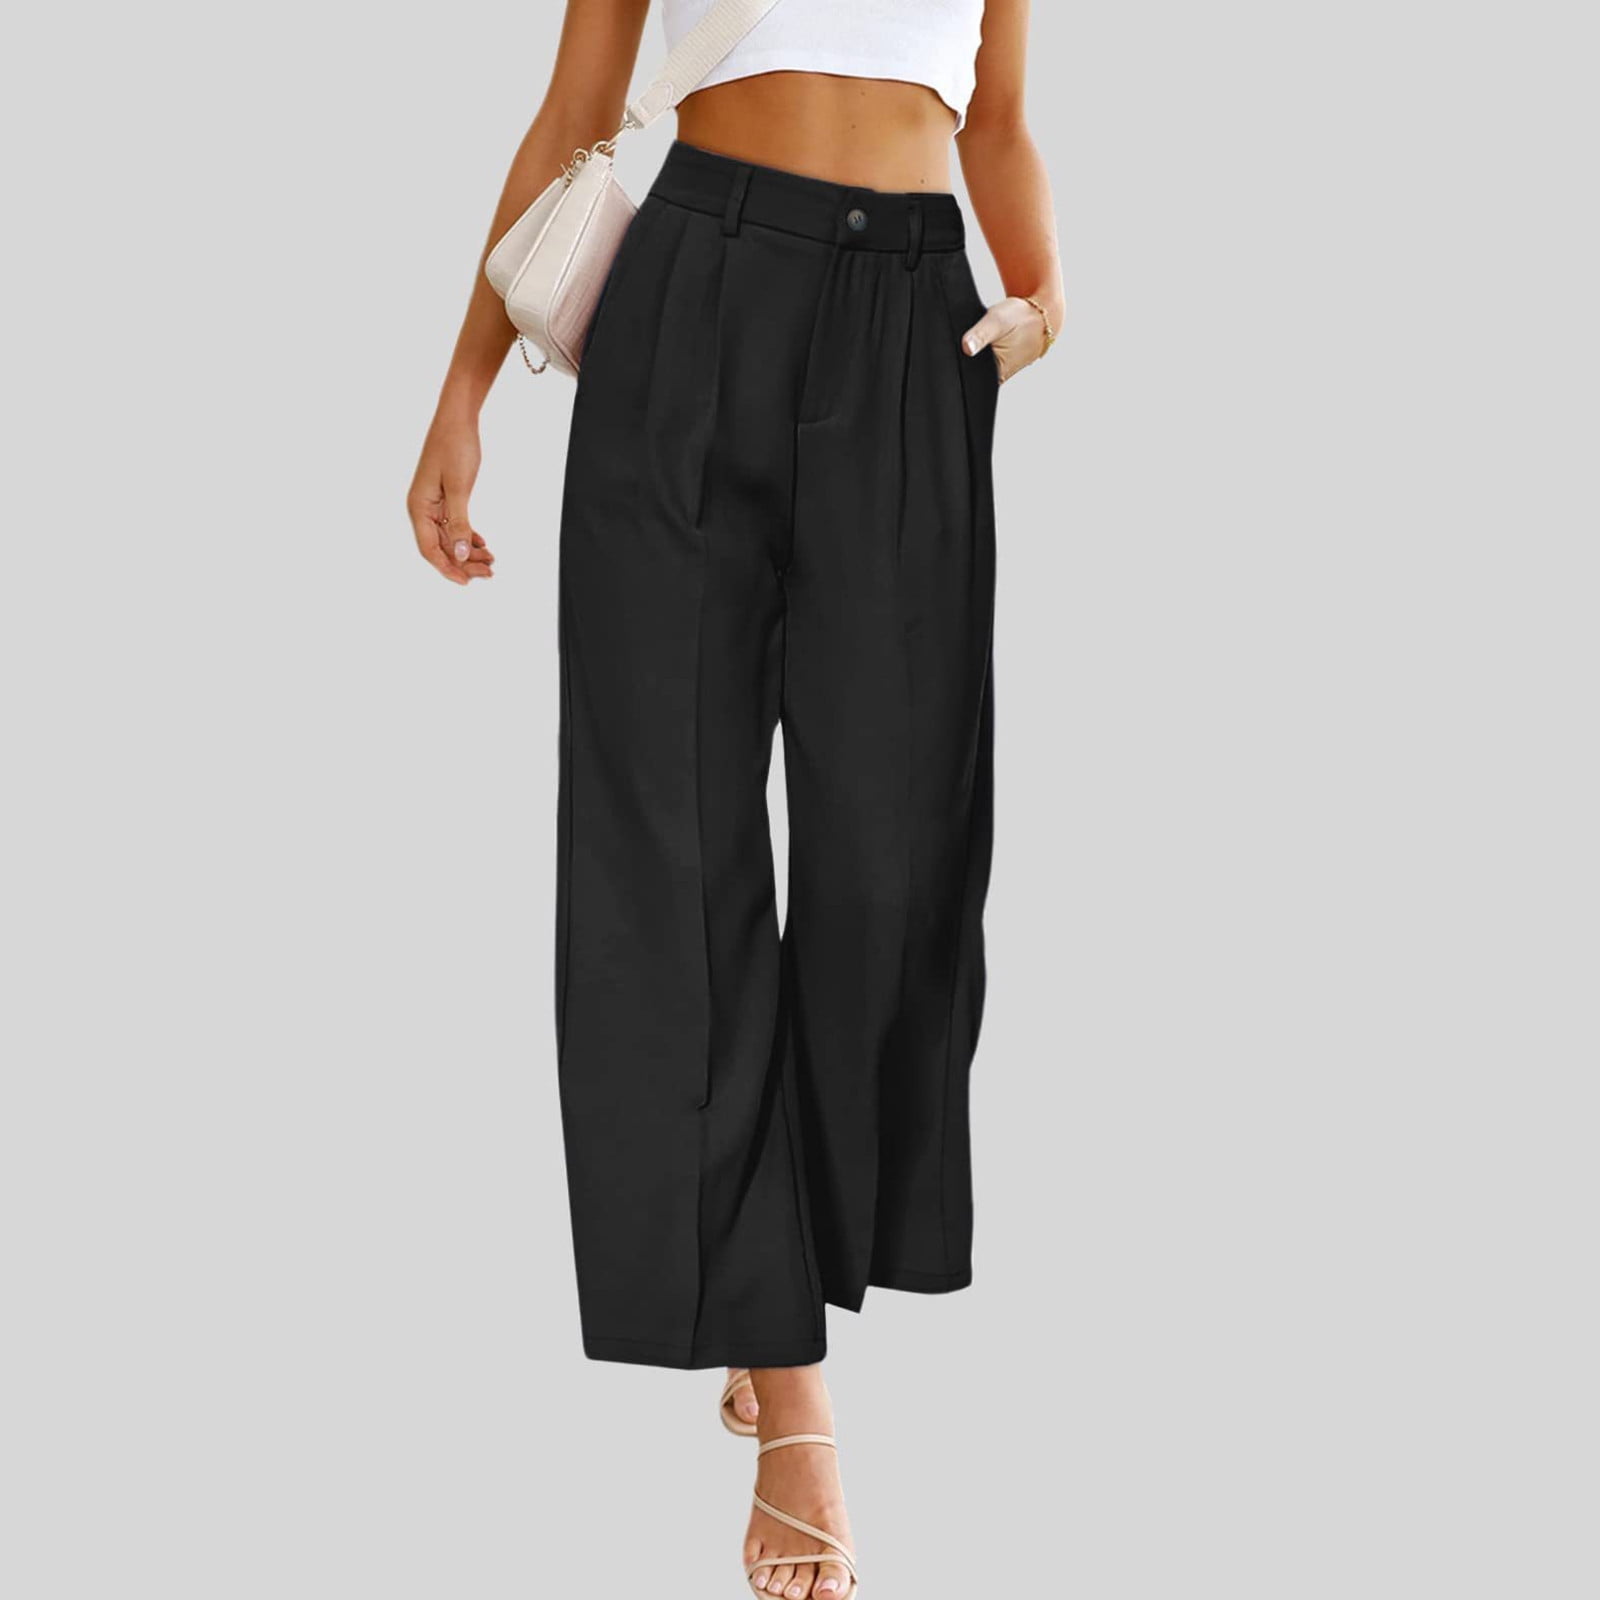 YWDJ Wide Leg Pants for Women Casual With Pockets High Waist